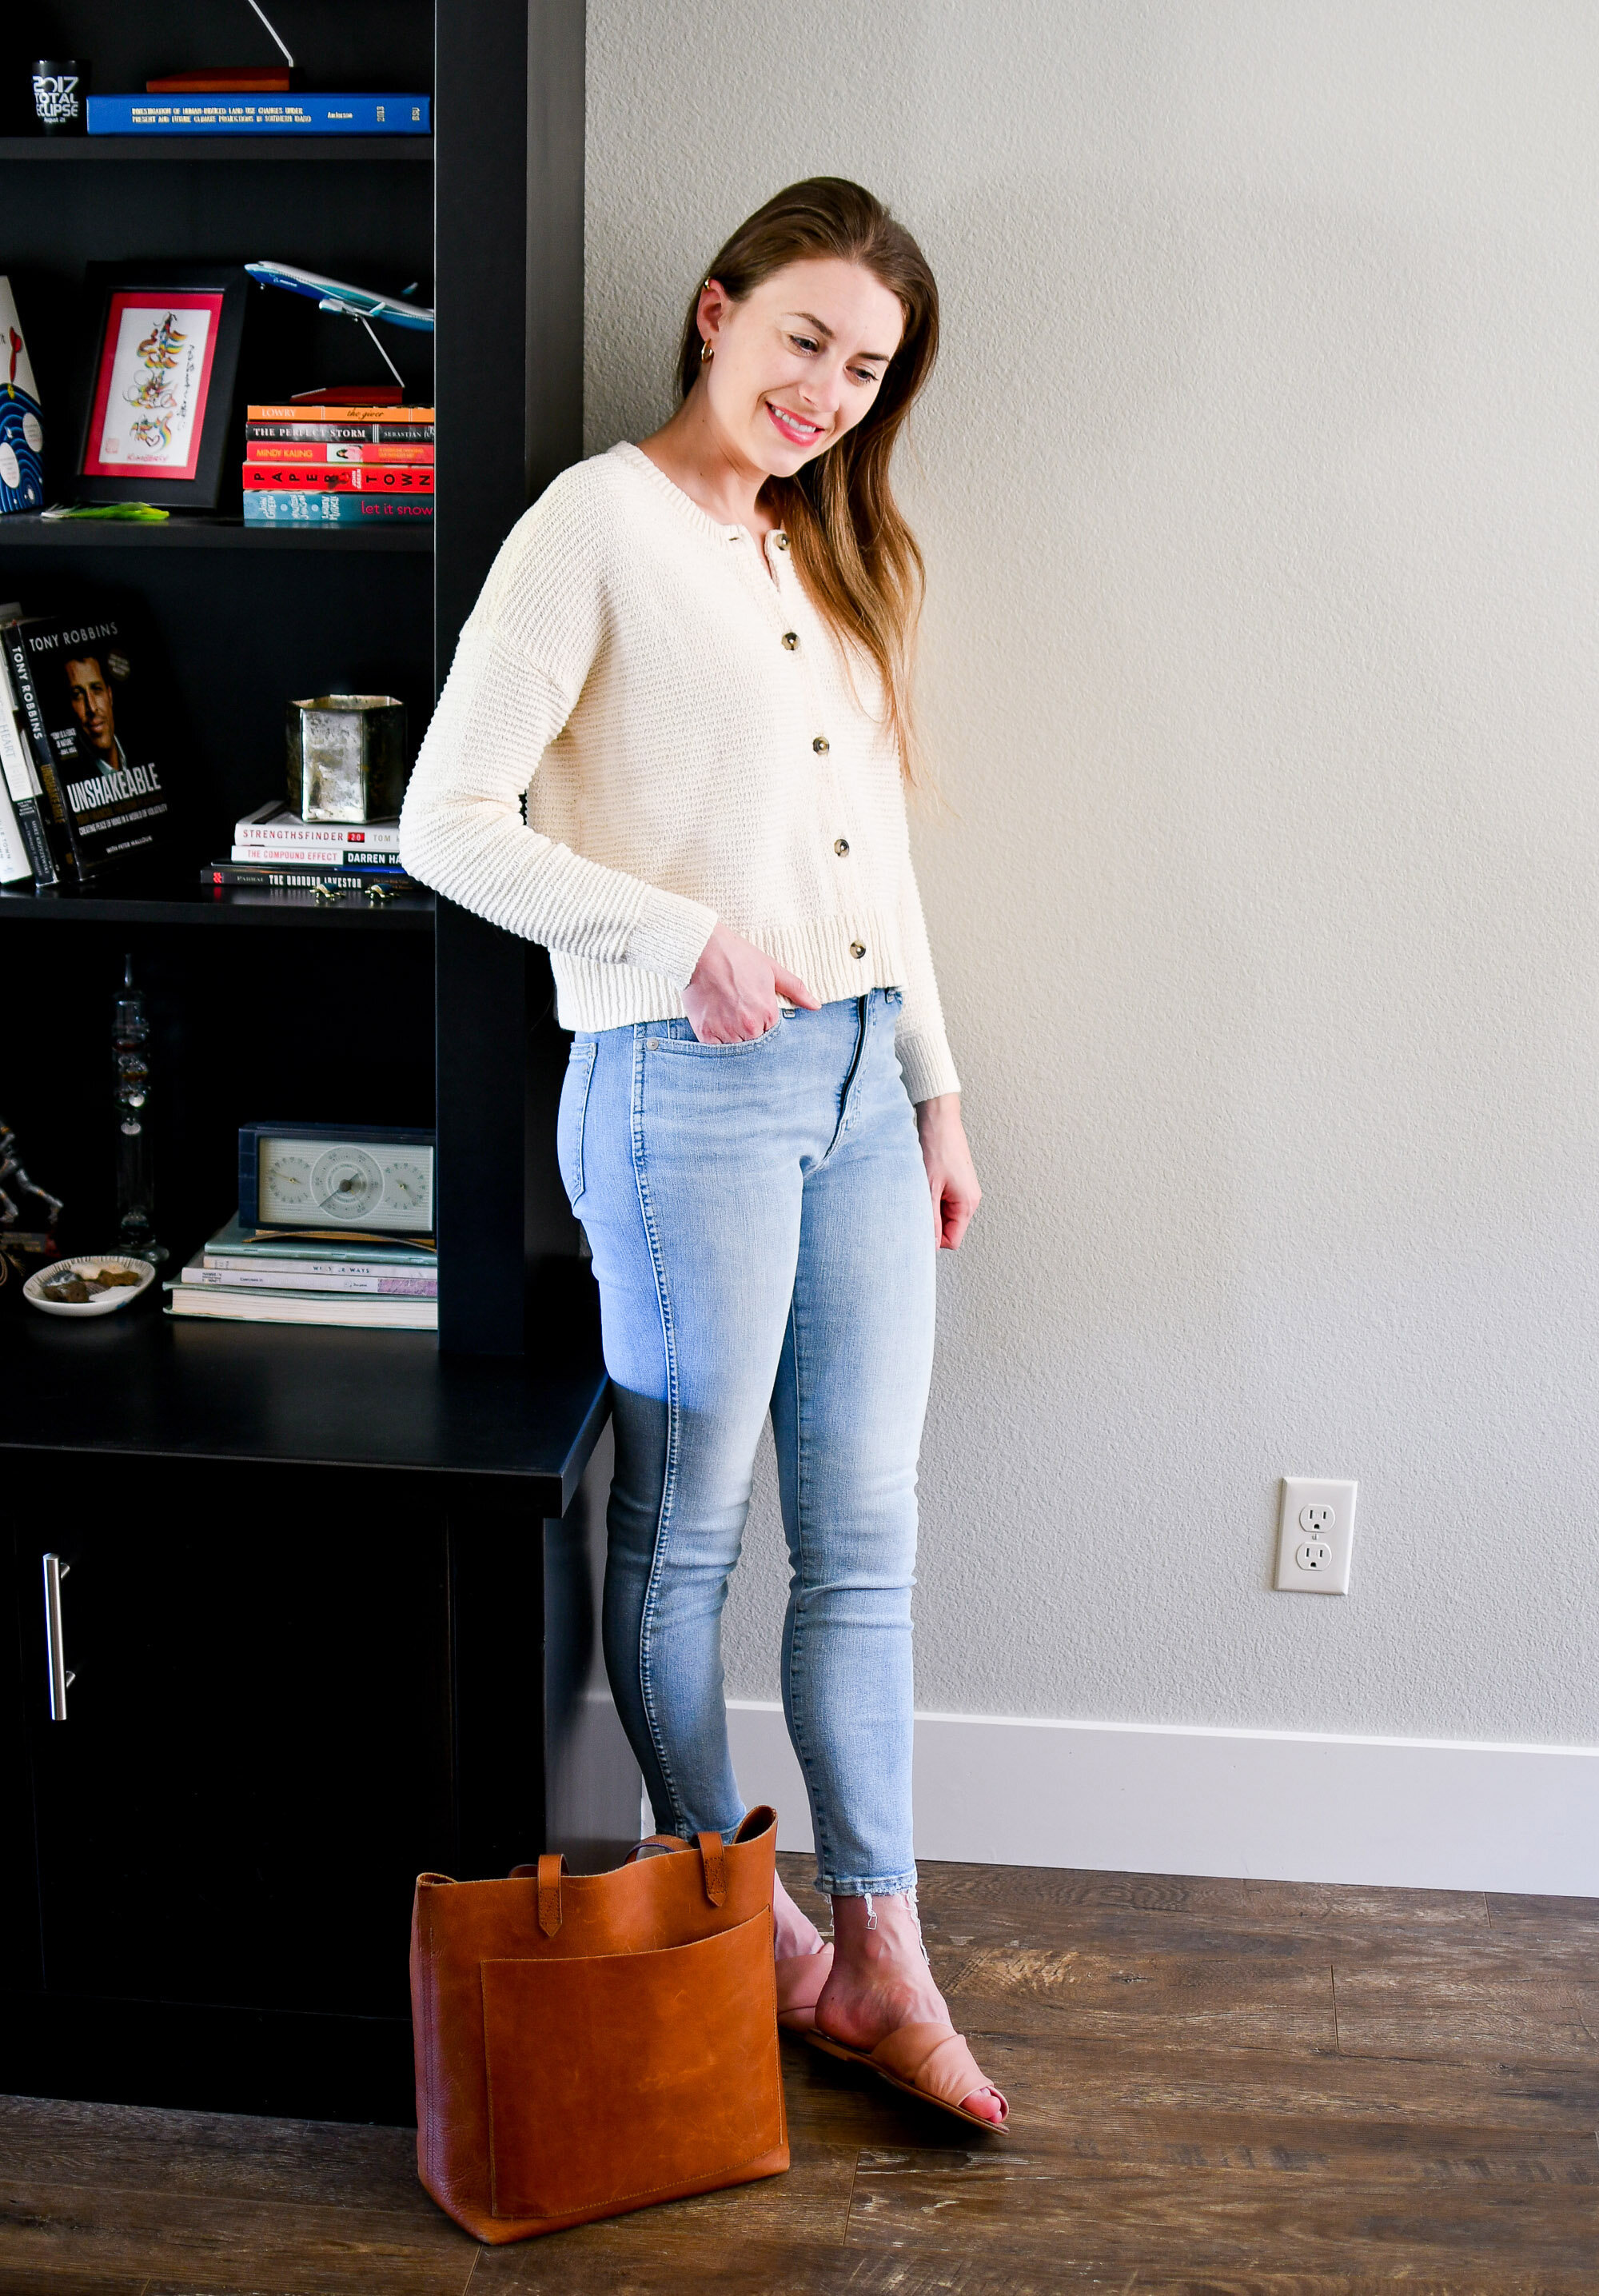 Reader favorite: Playing dress up: Two ways to wear the Madewell Deville cardigan sweater — Cotton Cashmere Cat Hair